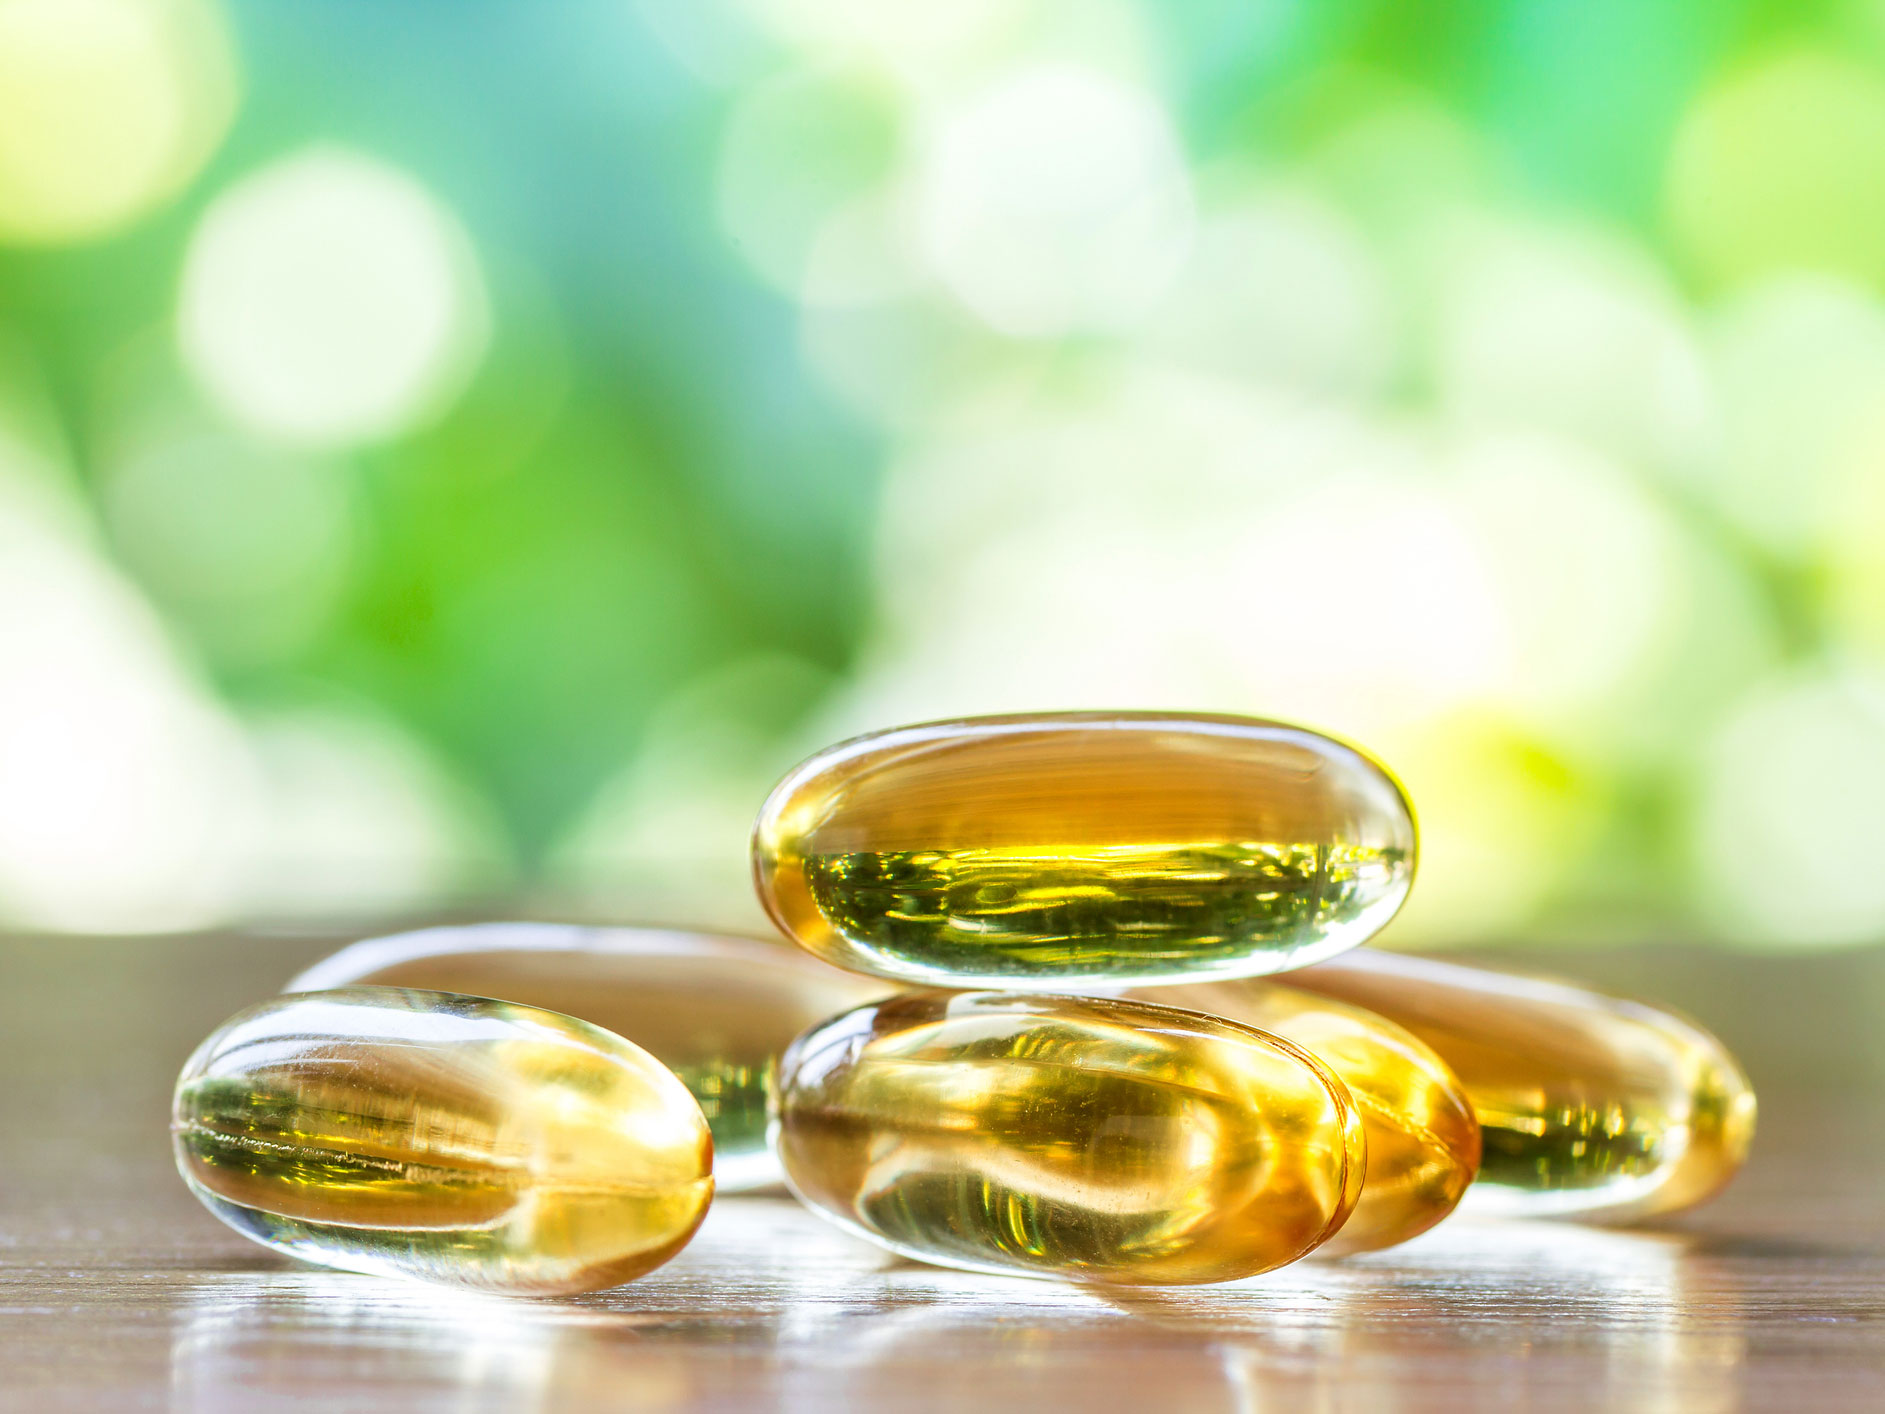 Why prescription fish oil may be the next cholesterol wonder ‘drug’